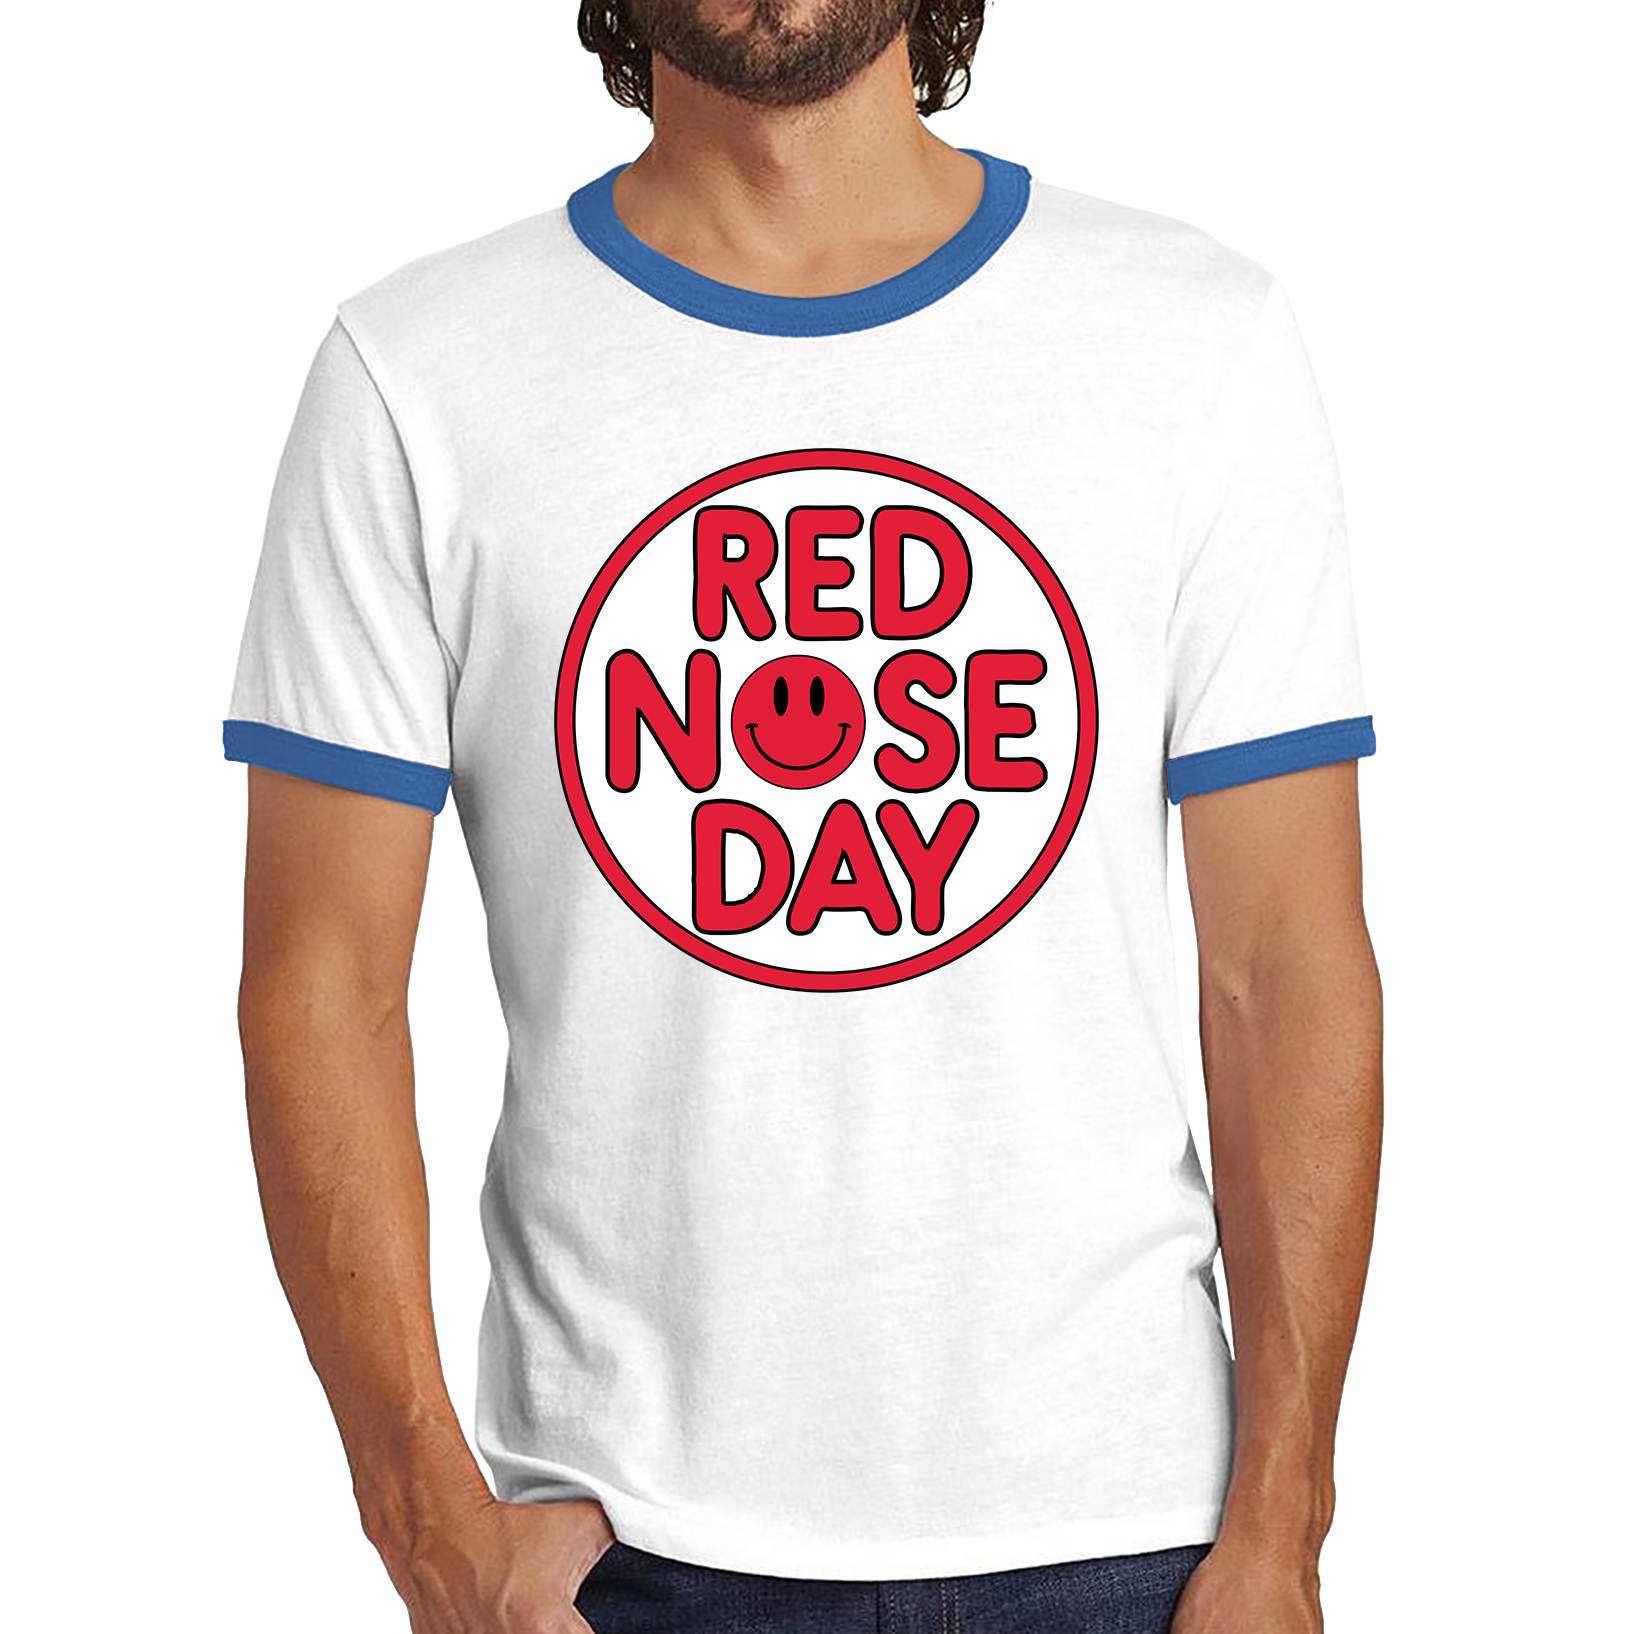 Smiley Face Red Nose Day Ringer T Shirt. 50% Goes To Charity